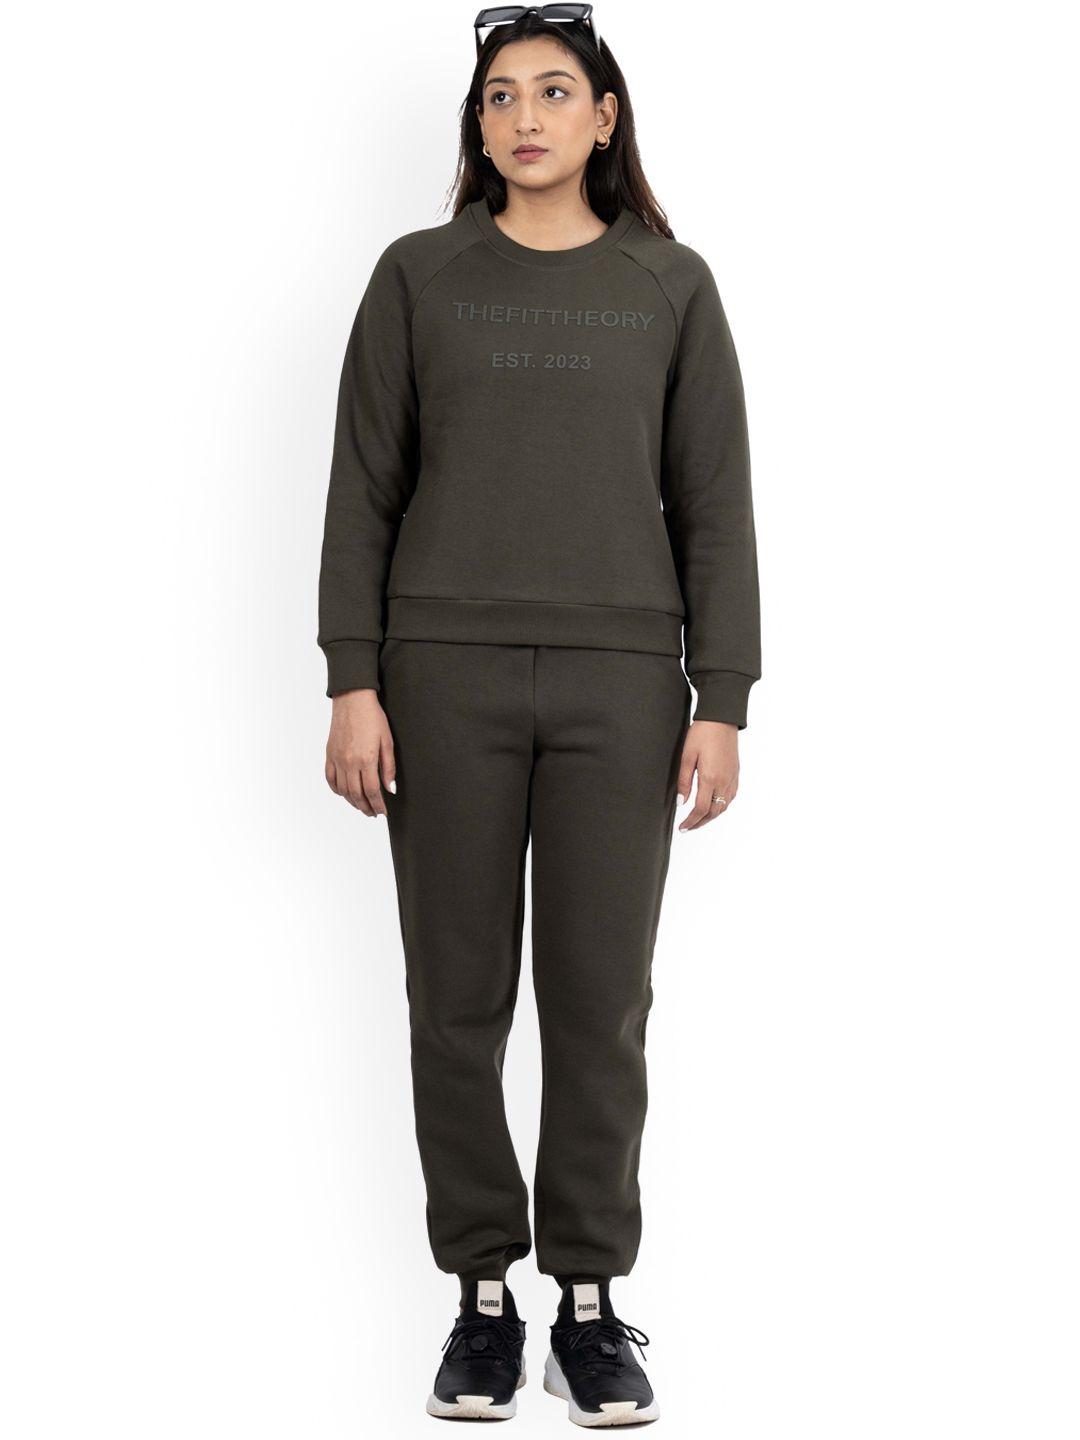 thefittheory sweatshirt with jogger co-ords